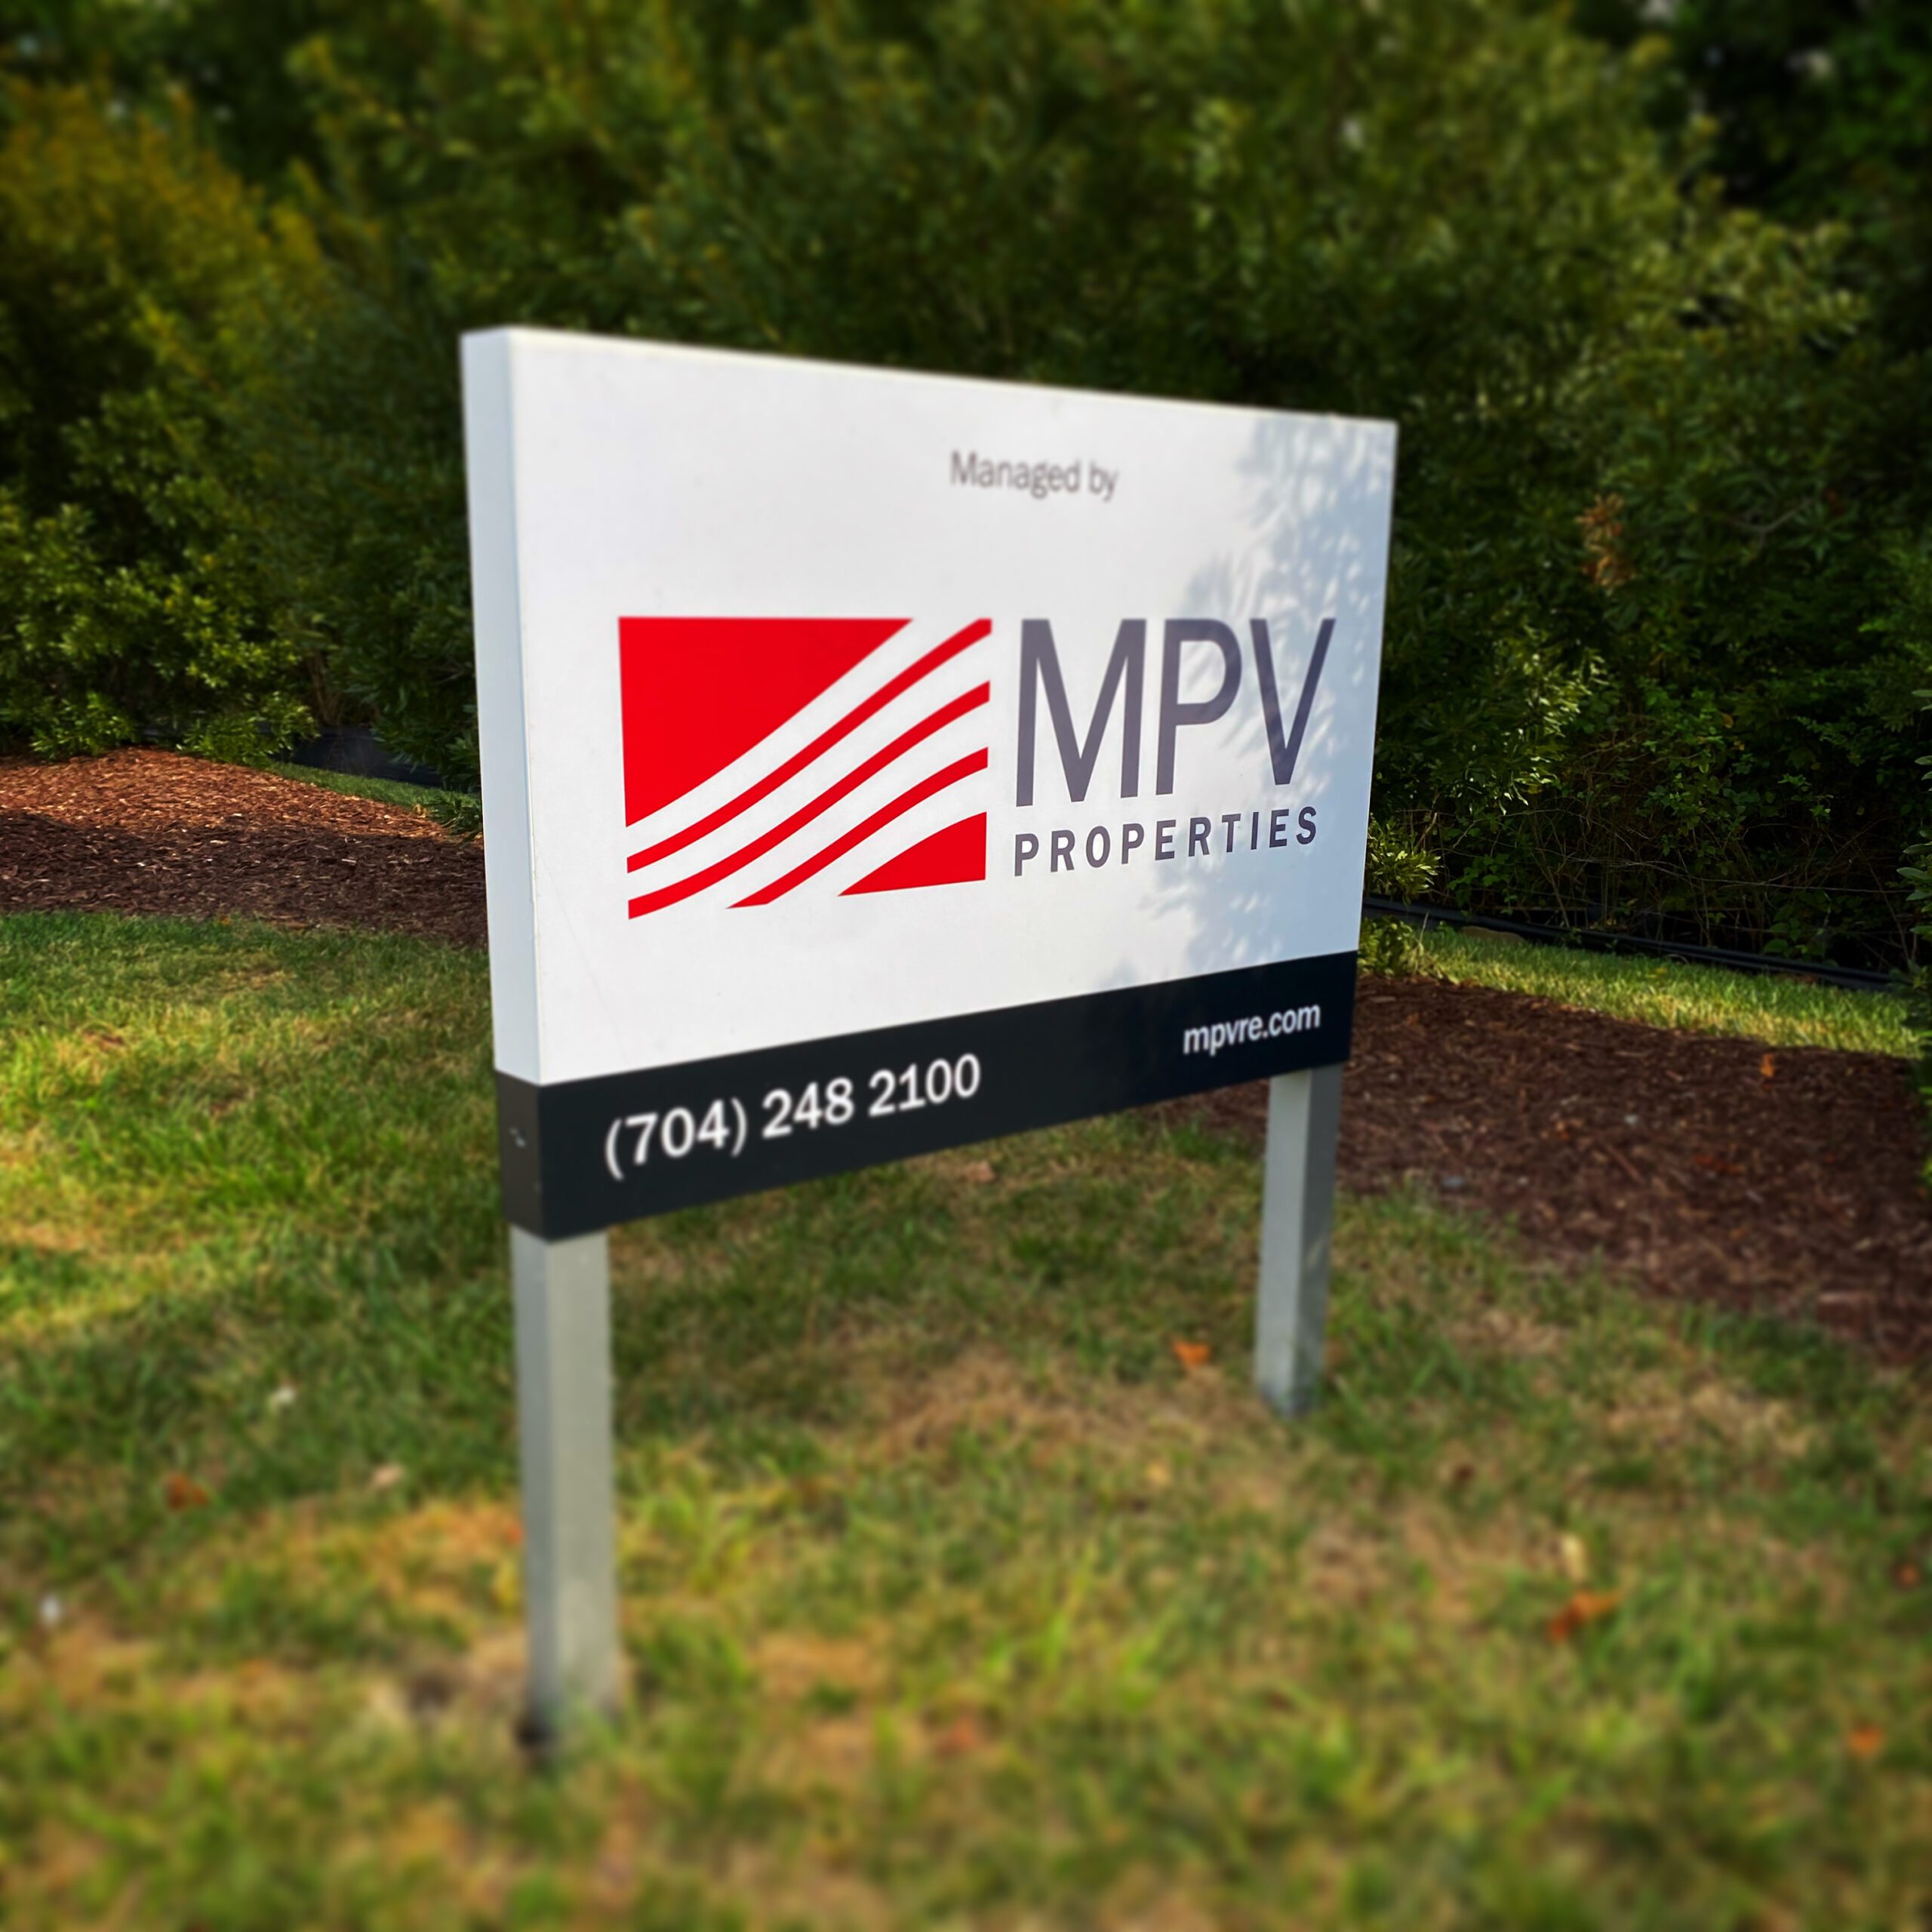 MPV Properties managed by property sign installed in the grass